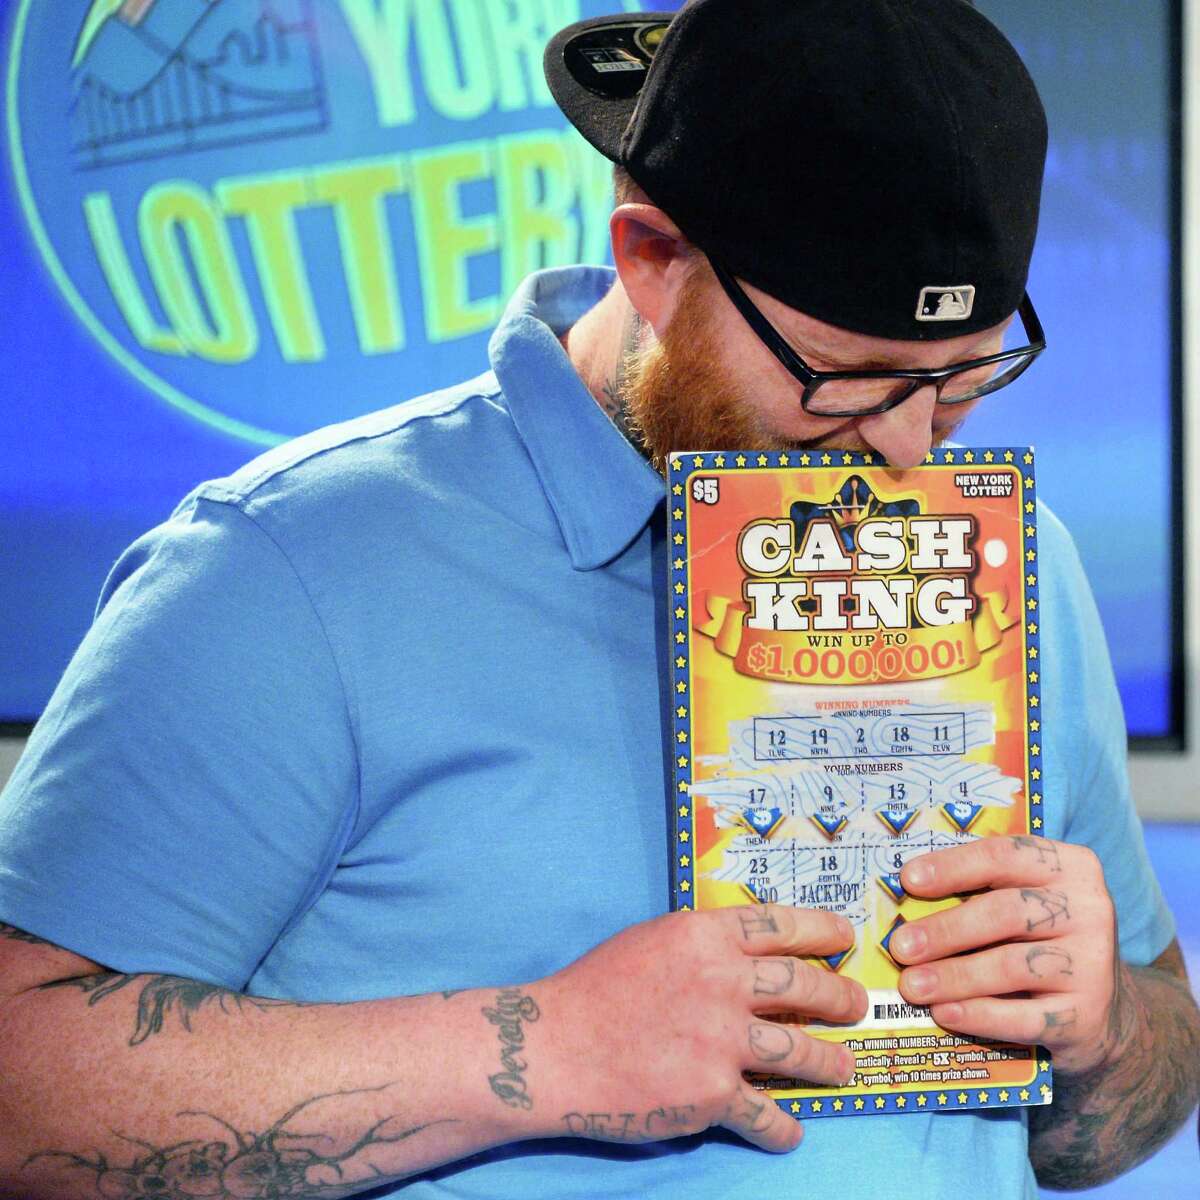 Matthew Beidl of Troy during a news conference announcing his $1 million top prize on the Cash King scratch-off game at the New York Lottery offices Thursday July 21, 2016 in Schenectady, NY. .(John Carl D'Annibale / Times Union)